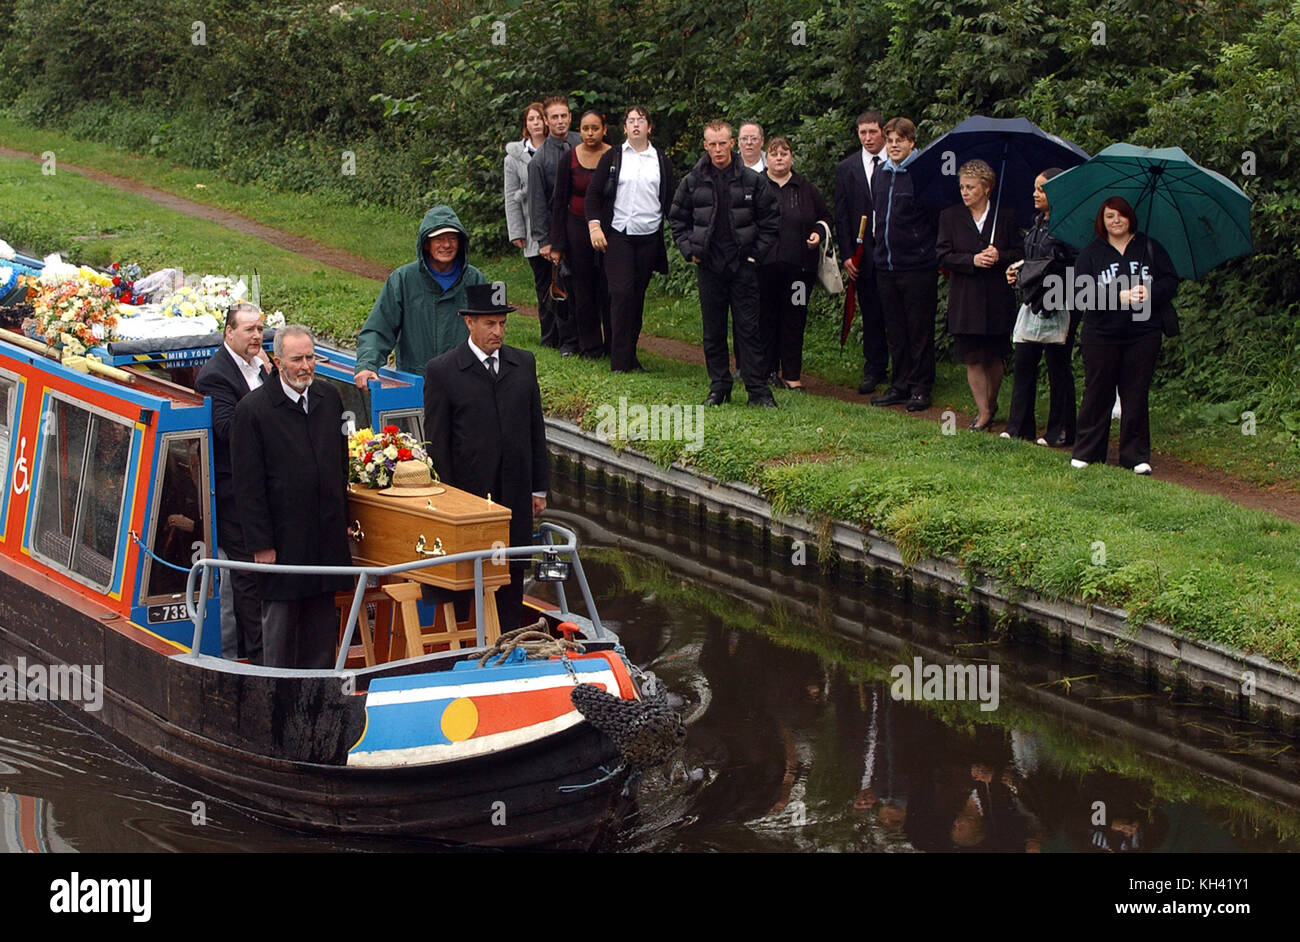 Mourners watch narrowboat carrying coffin on canal near Wolverhampton Uk Stock Photo